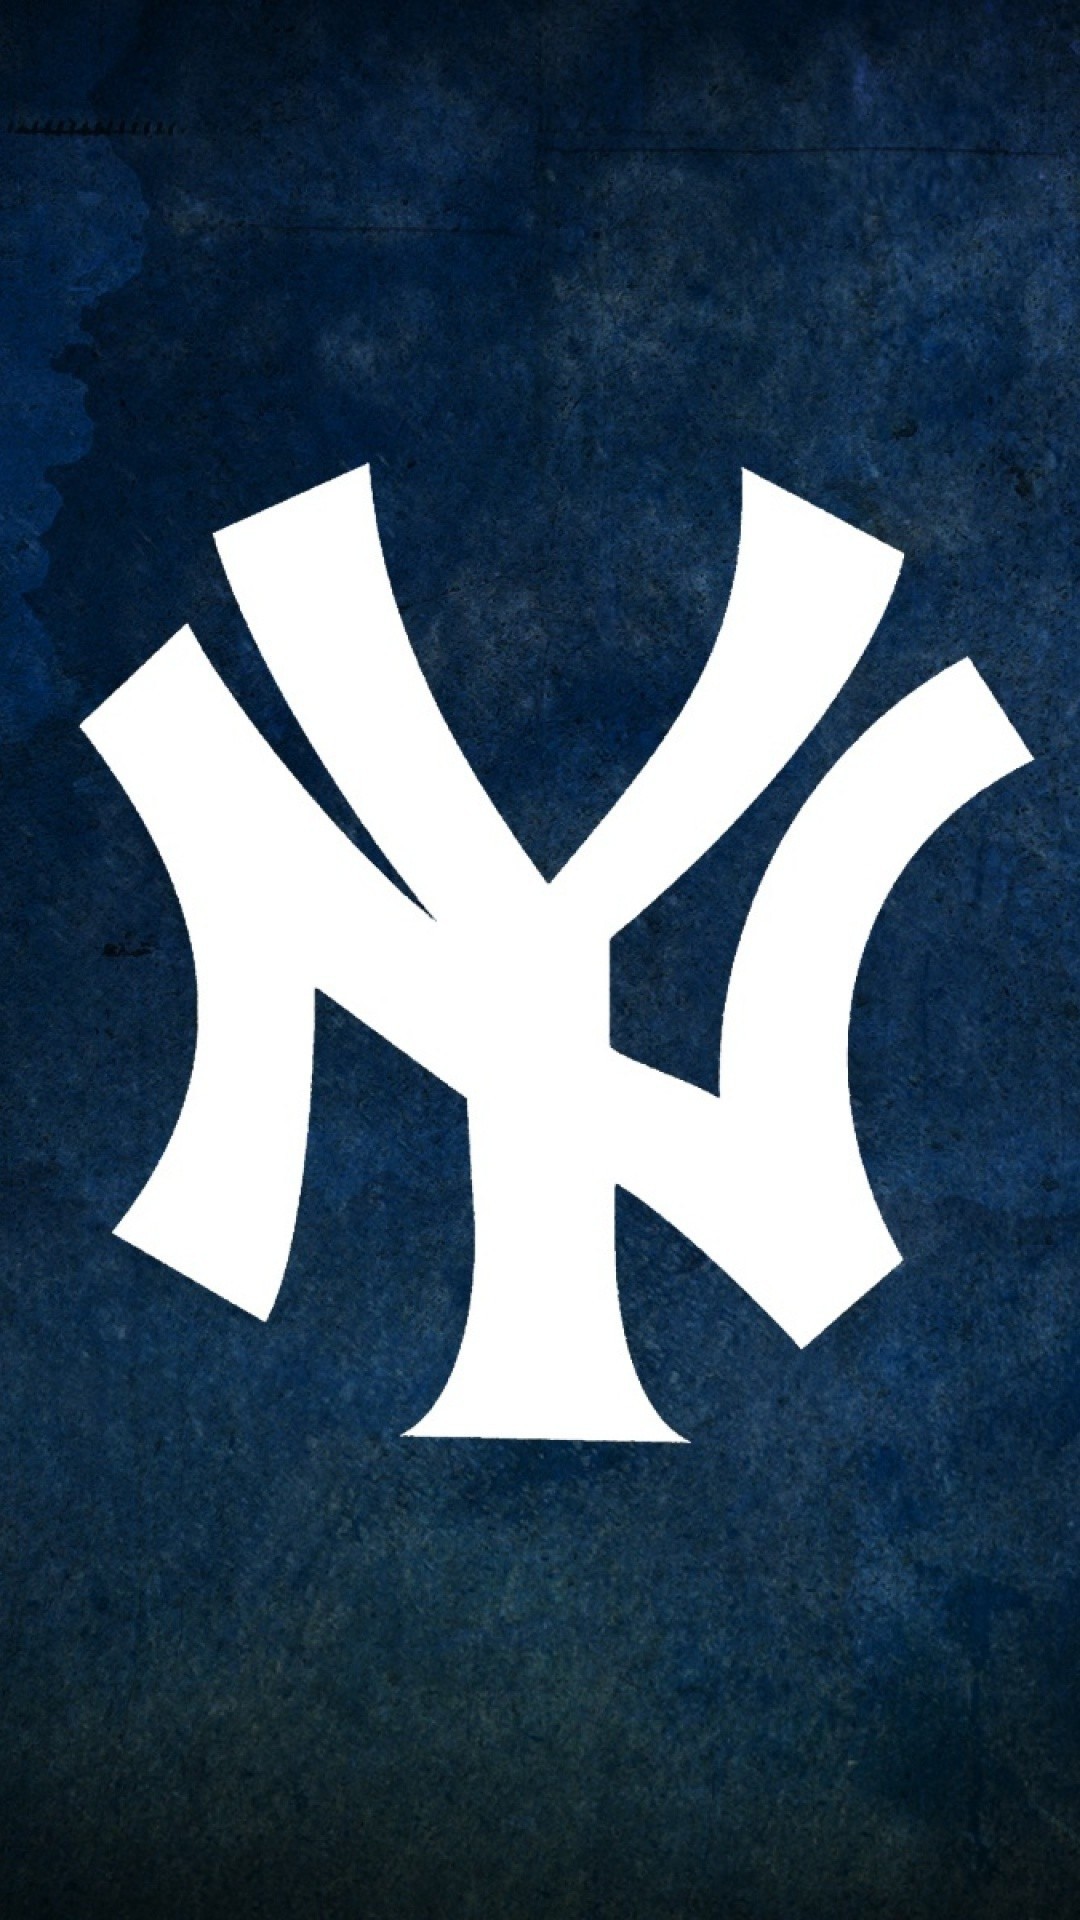 1080x1920 ... New york yankees wallpaper iphone awesome yankees wallpapers